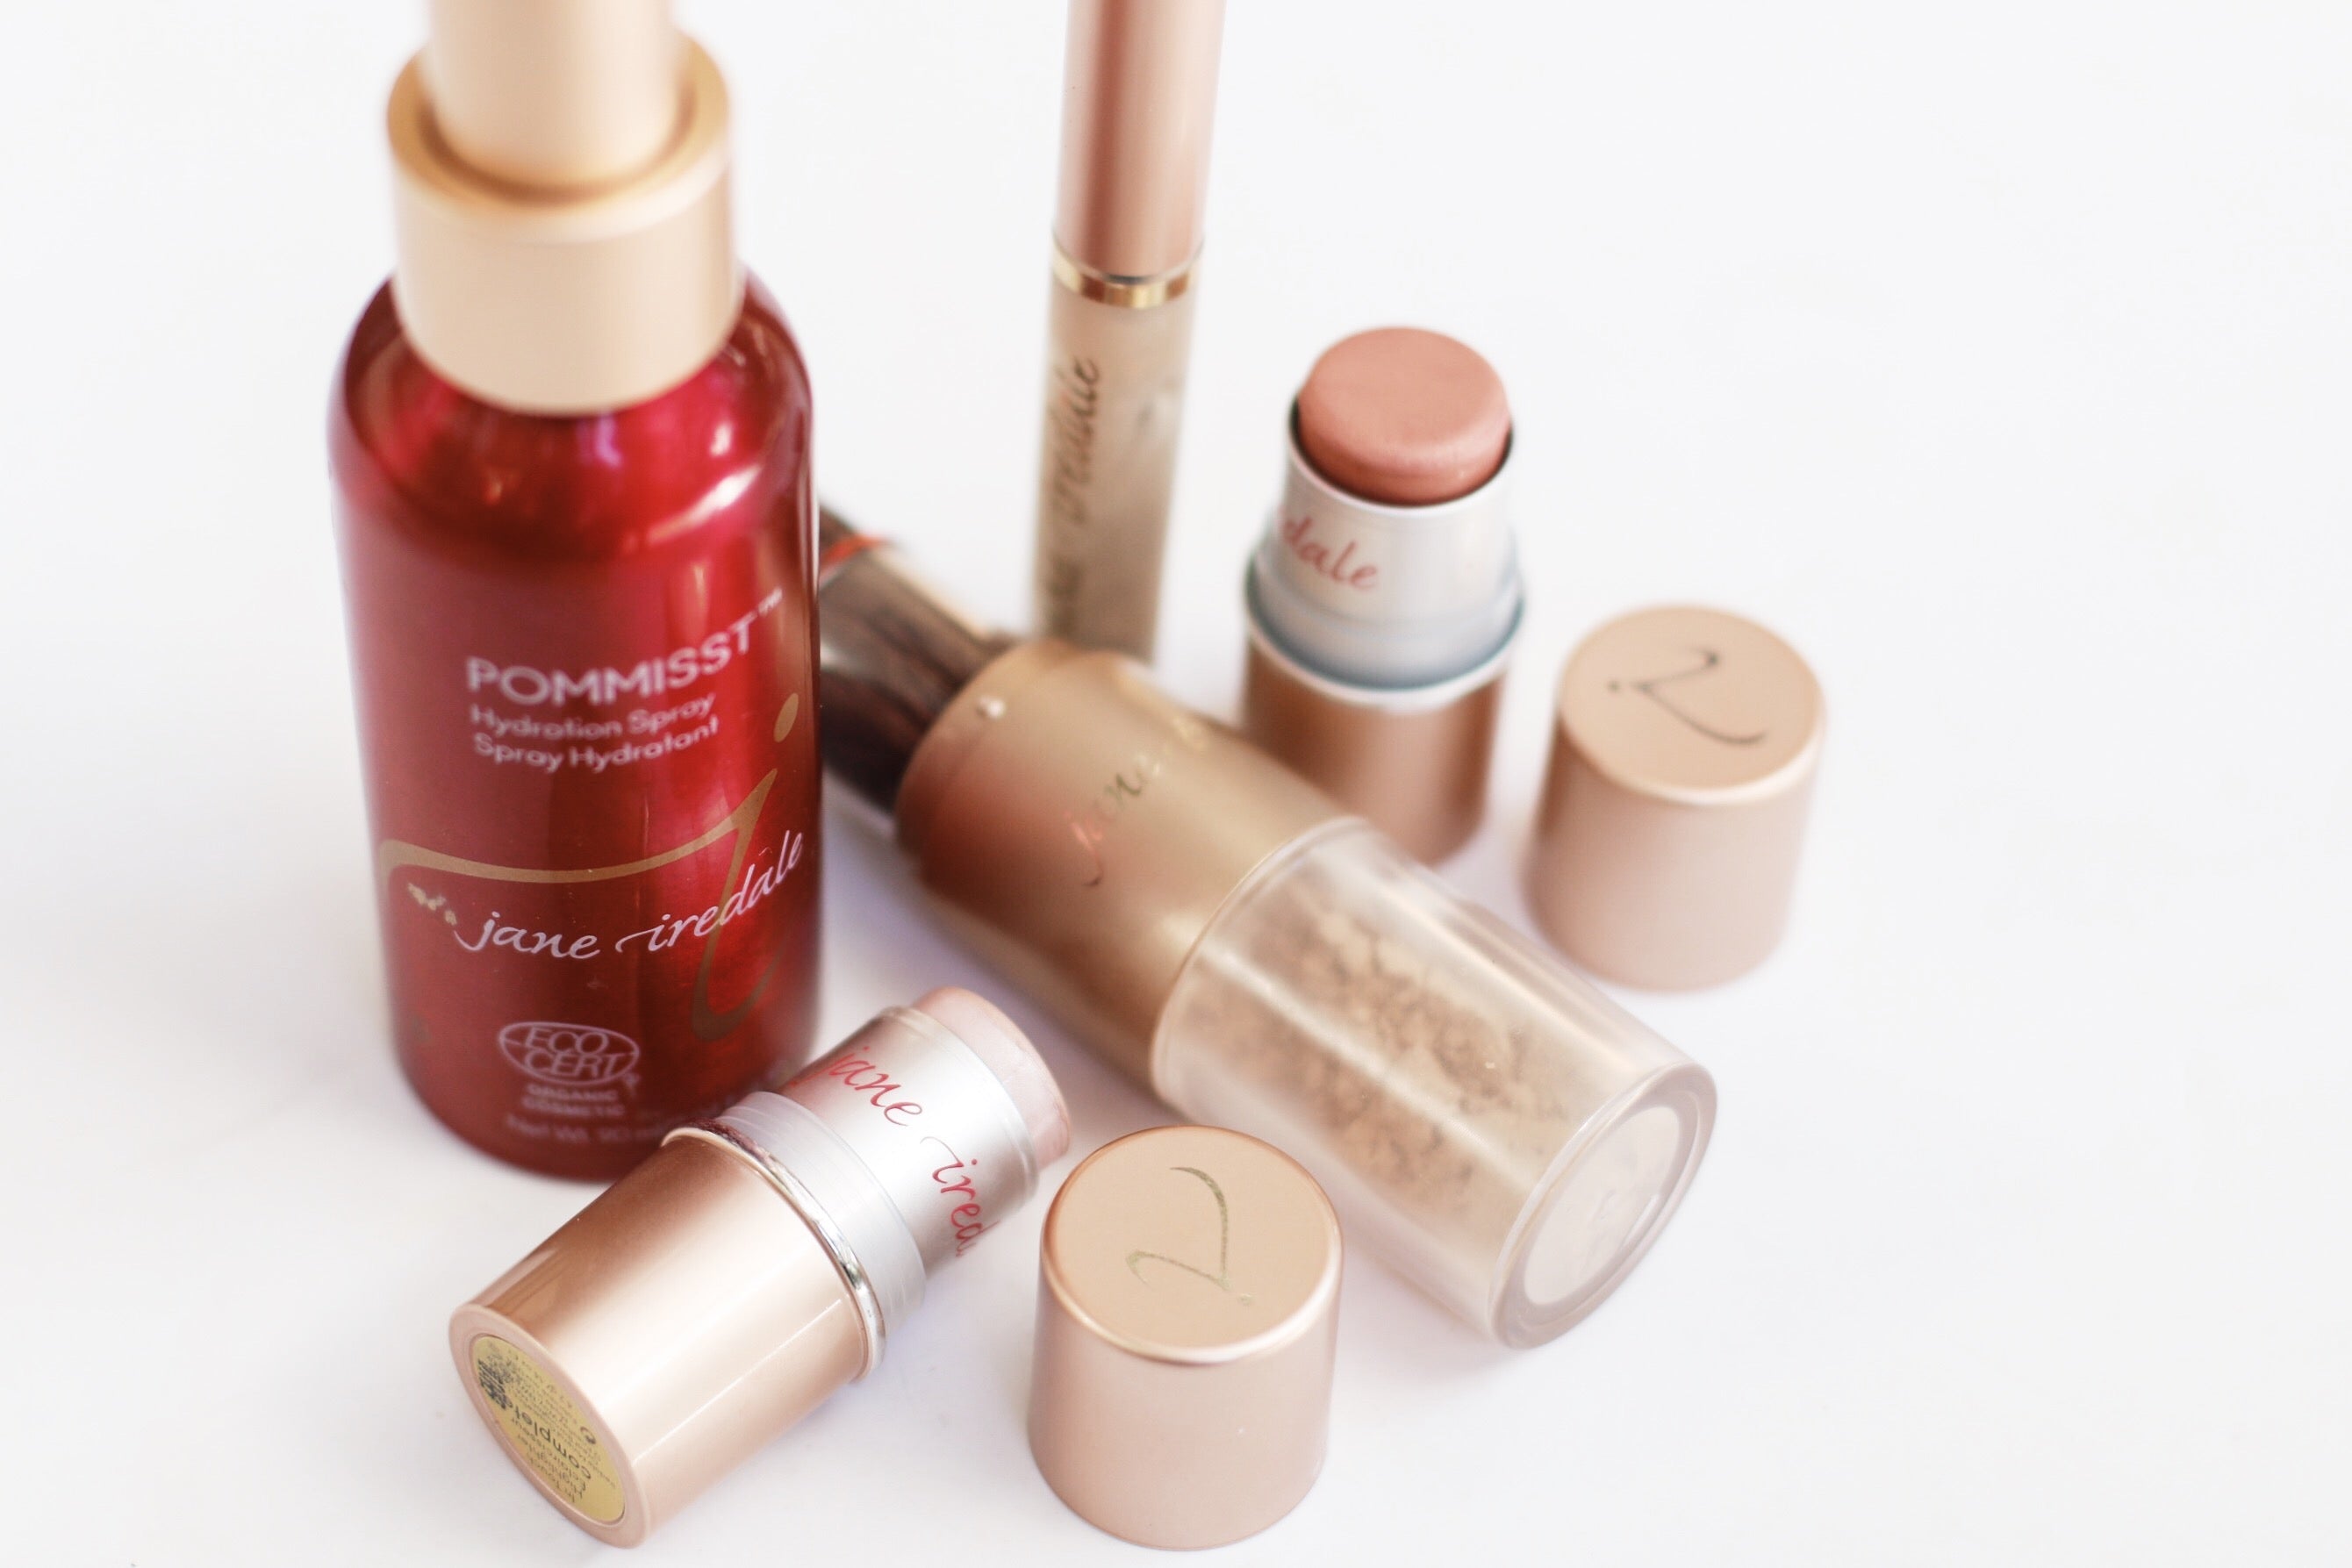 jane iredale on-the-go essentials